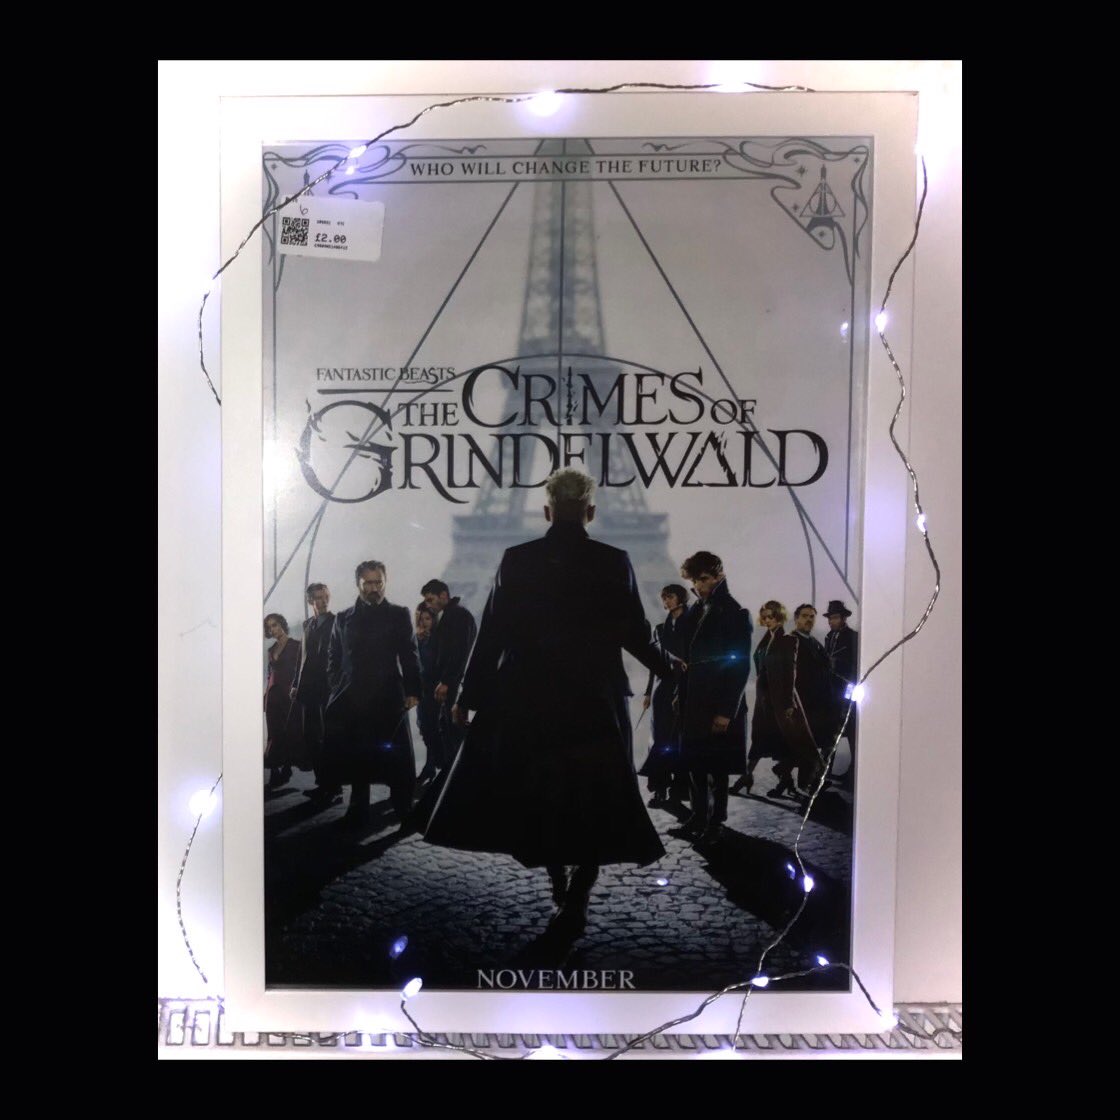 Spotted this framed #FantasticBeasts poster in a charity shop recently! 👀✨

~Had another bid on my Bookmark in the #BookmarkProject auction! 
4 days left! jumblebee.co.uk/auction/detail… ✨

#DhekeliaDesigns #HarryPotter #Thrifting #Charity #CharityShop #Auction